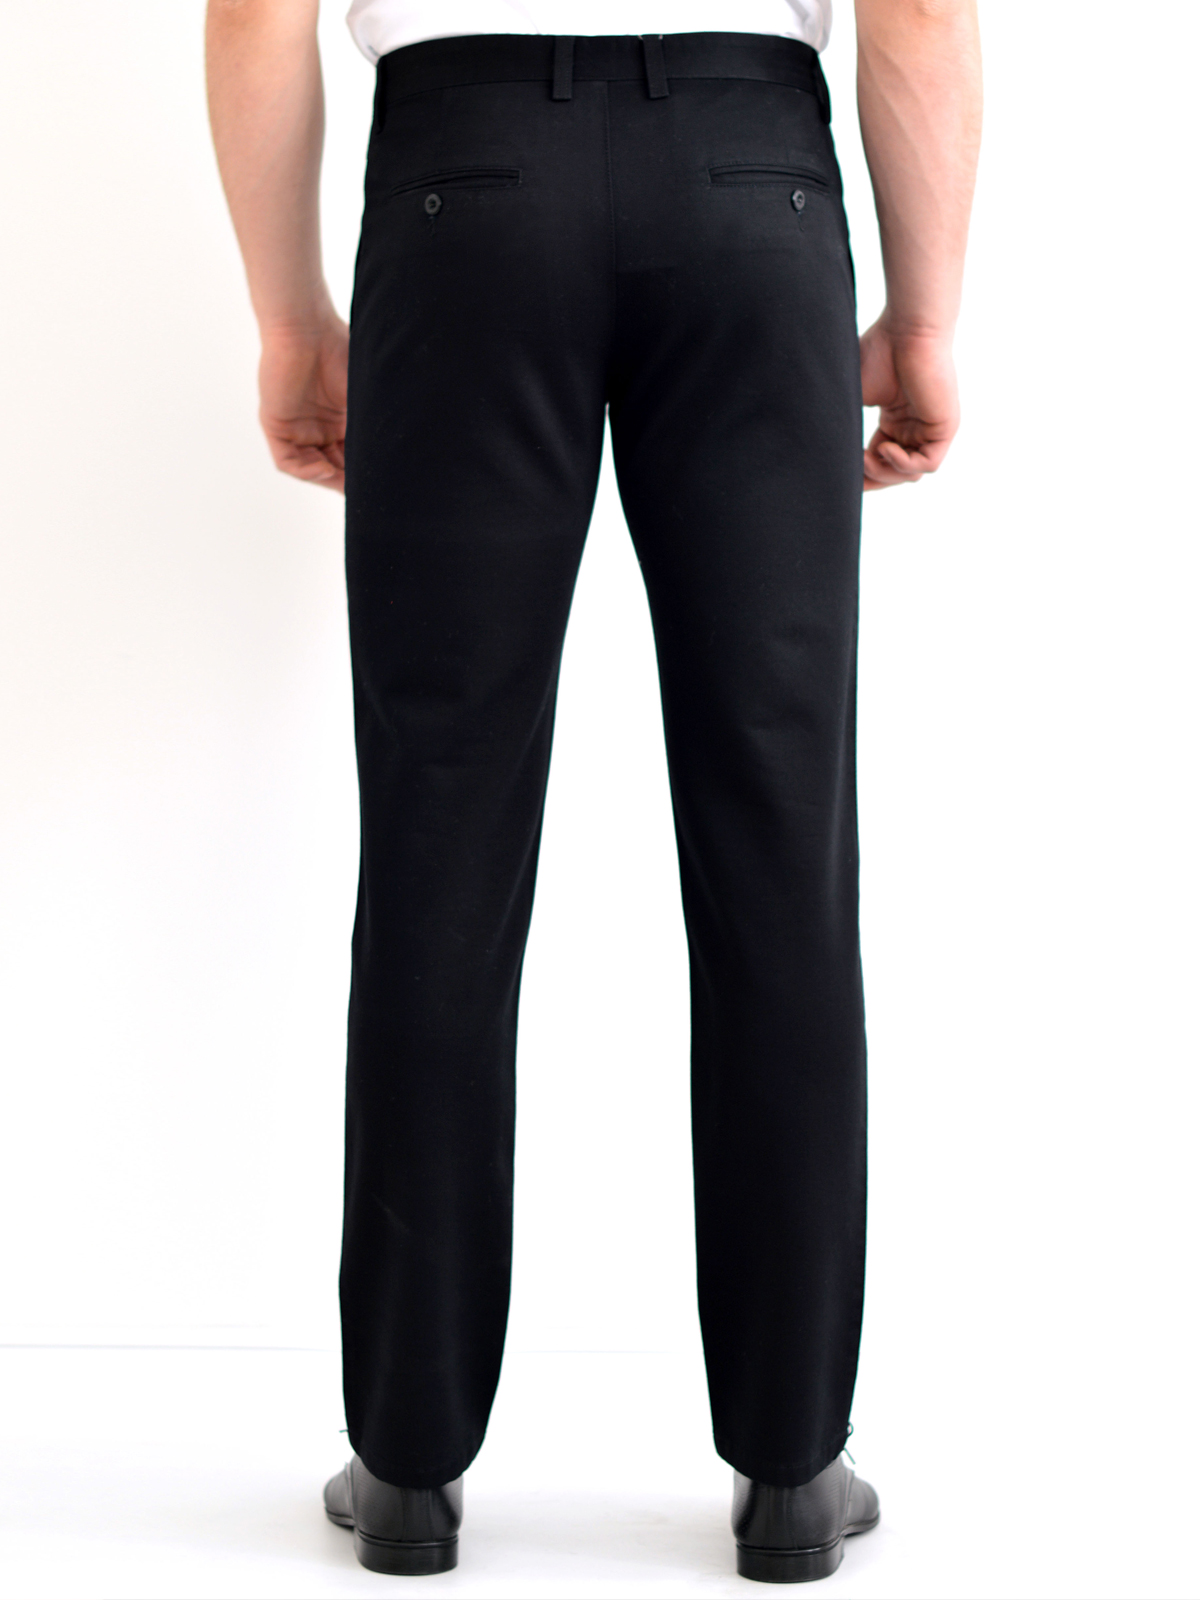 Black pants made of cotton and elastane - 60172 € 11.25 img2